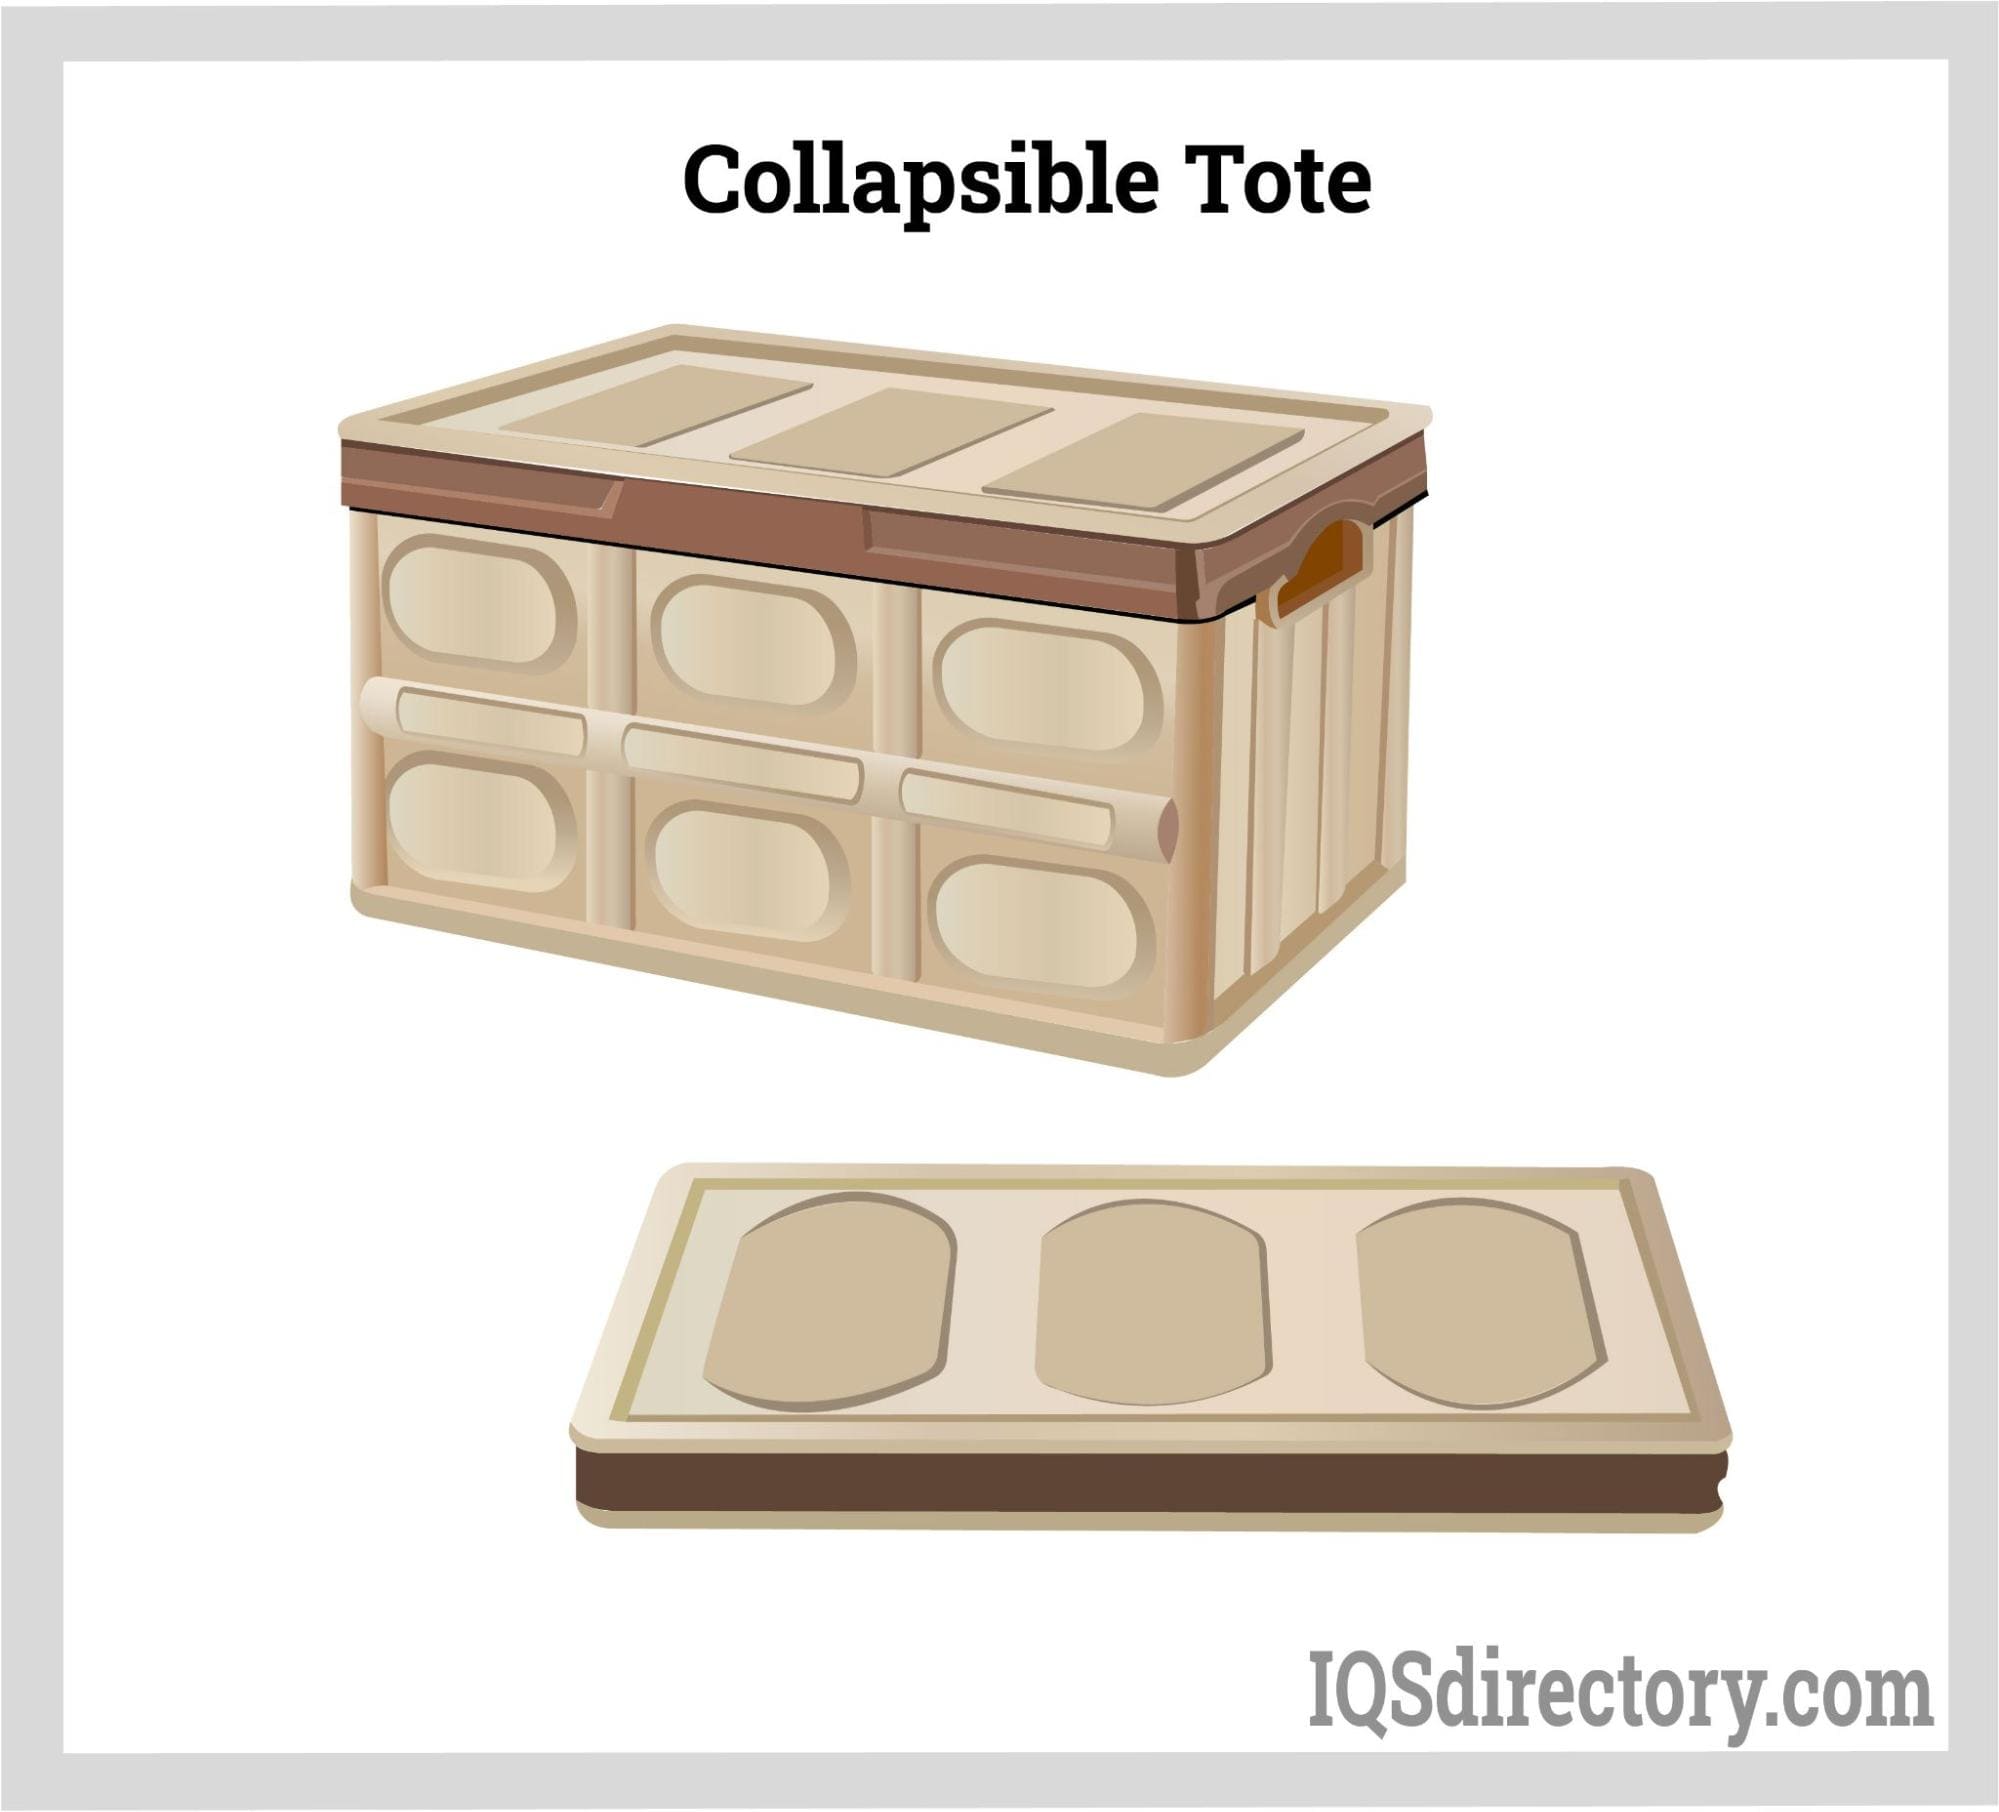 Used Collapsible Plastic Containers, Totes & Storage Bins